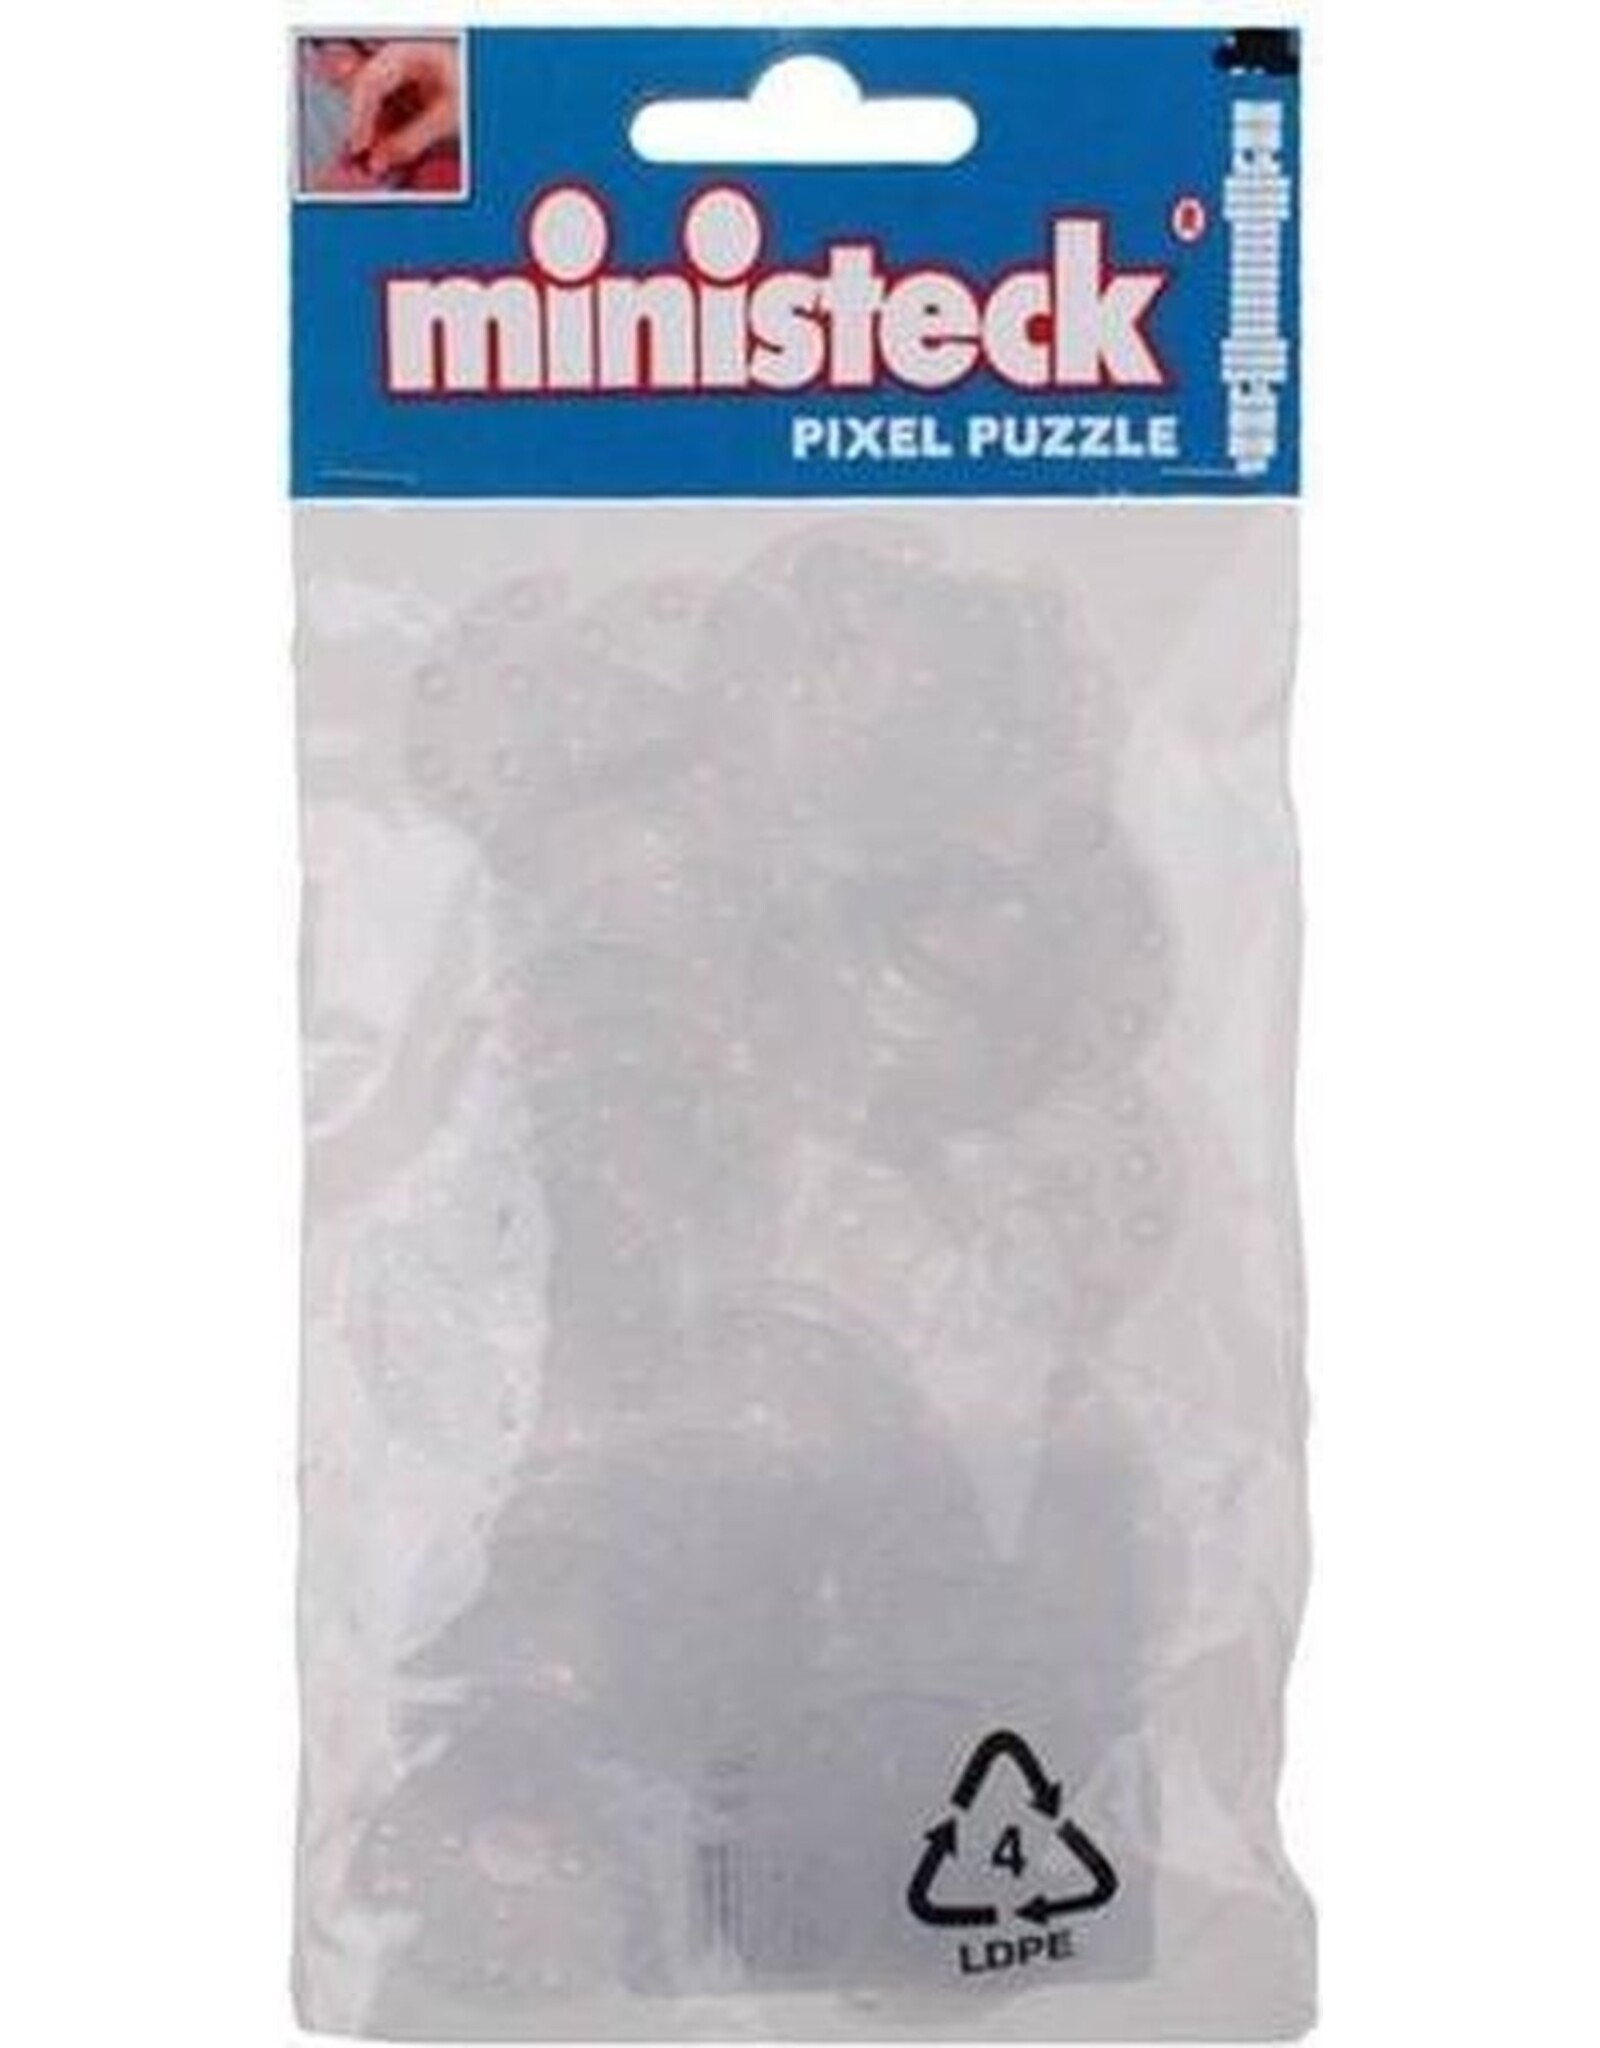 Ministeck Feuchtmann - Ministeck accessory set 2: hanging hooks + connecting pieces